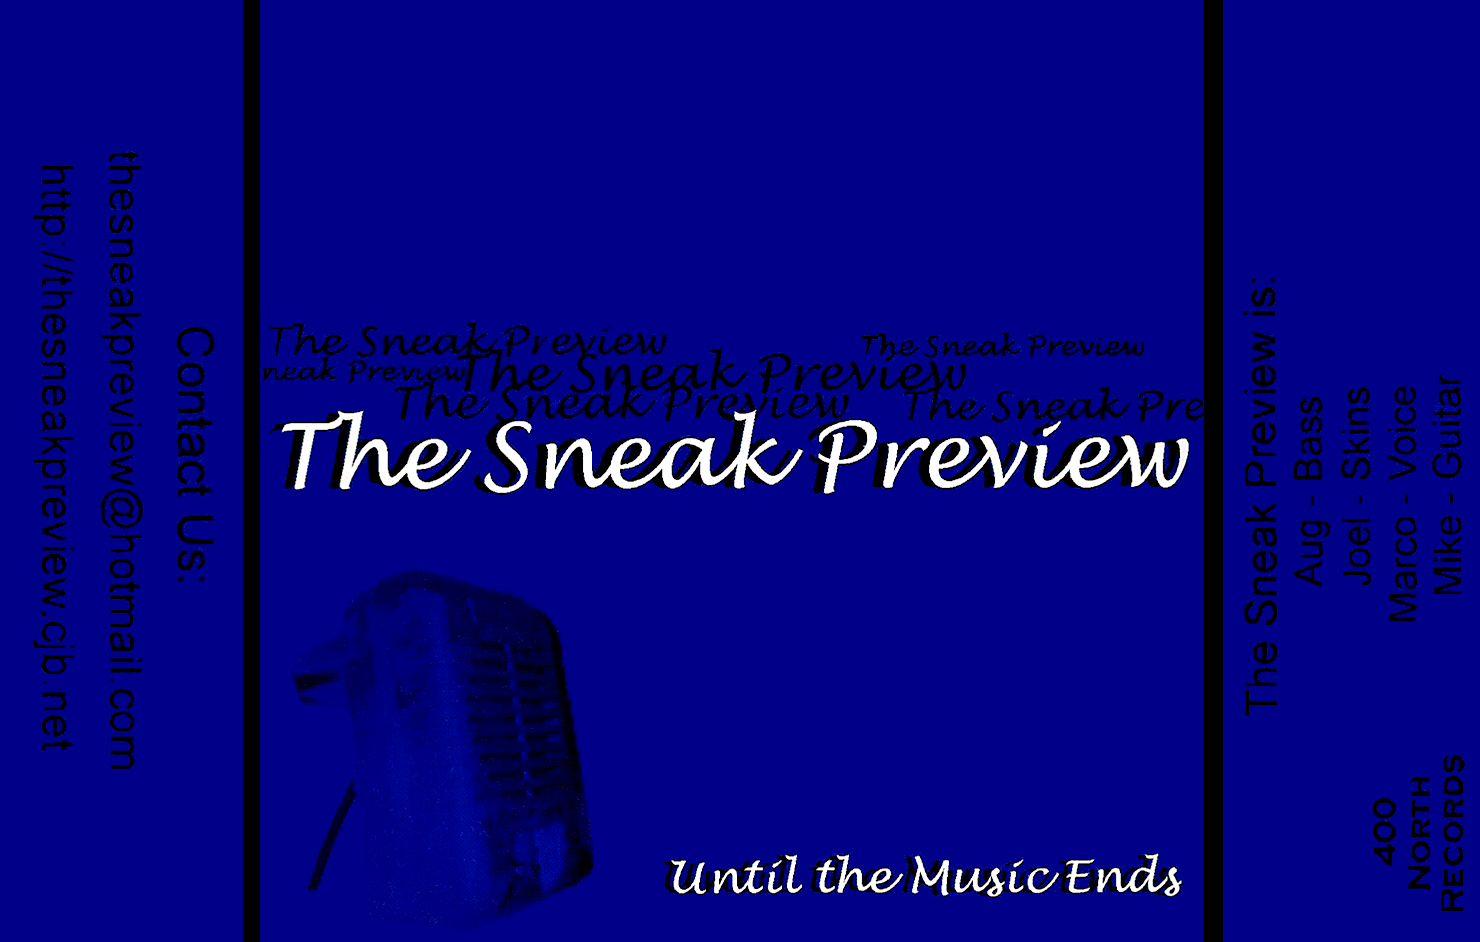 The Sneak Preview EP/demo "Until the Music Ends", 400 North Records, March 2001